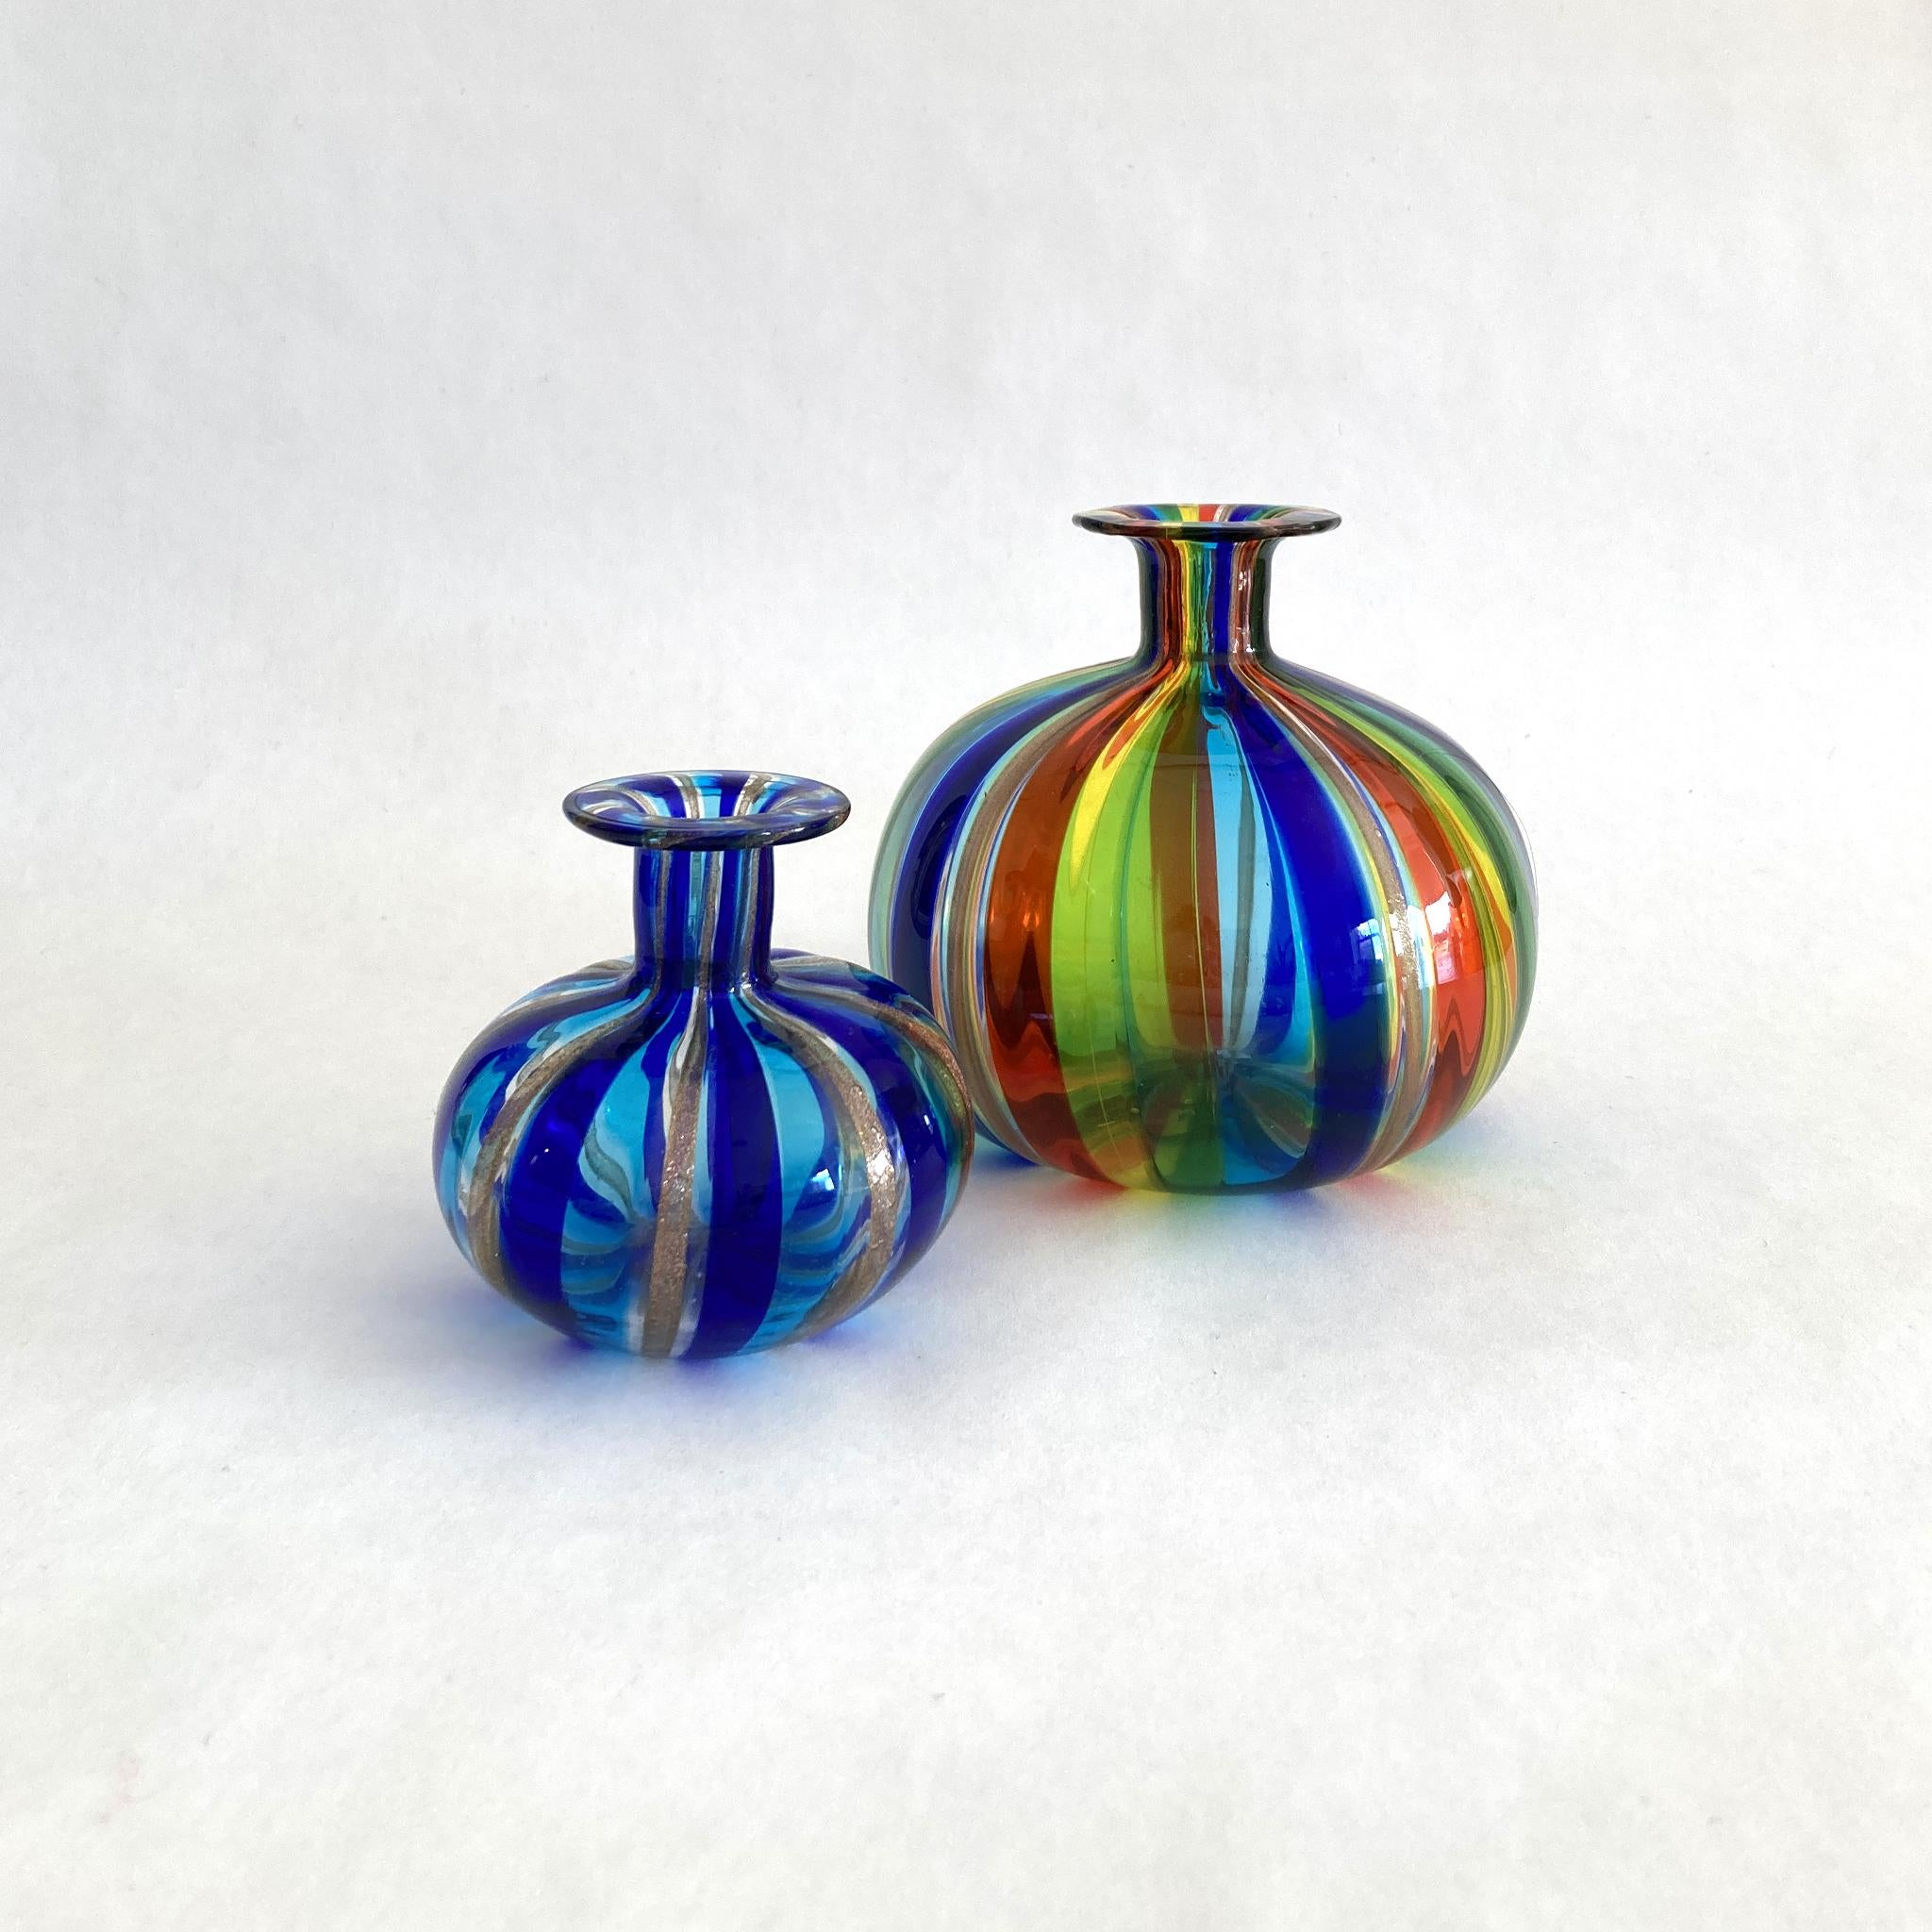 Stunning pair of hand blown Murano petite bud vases/ bottles in multicolor stripes including gold, blue, aqua, red, yellow and green. In great condition, no marks or cracks. Absolutely glittering in the light, see photos.

Multicolor larger vase: